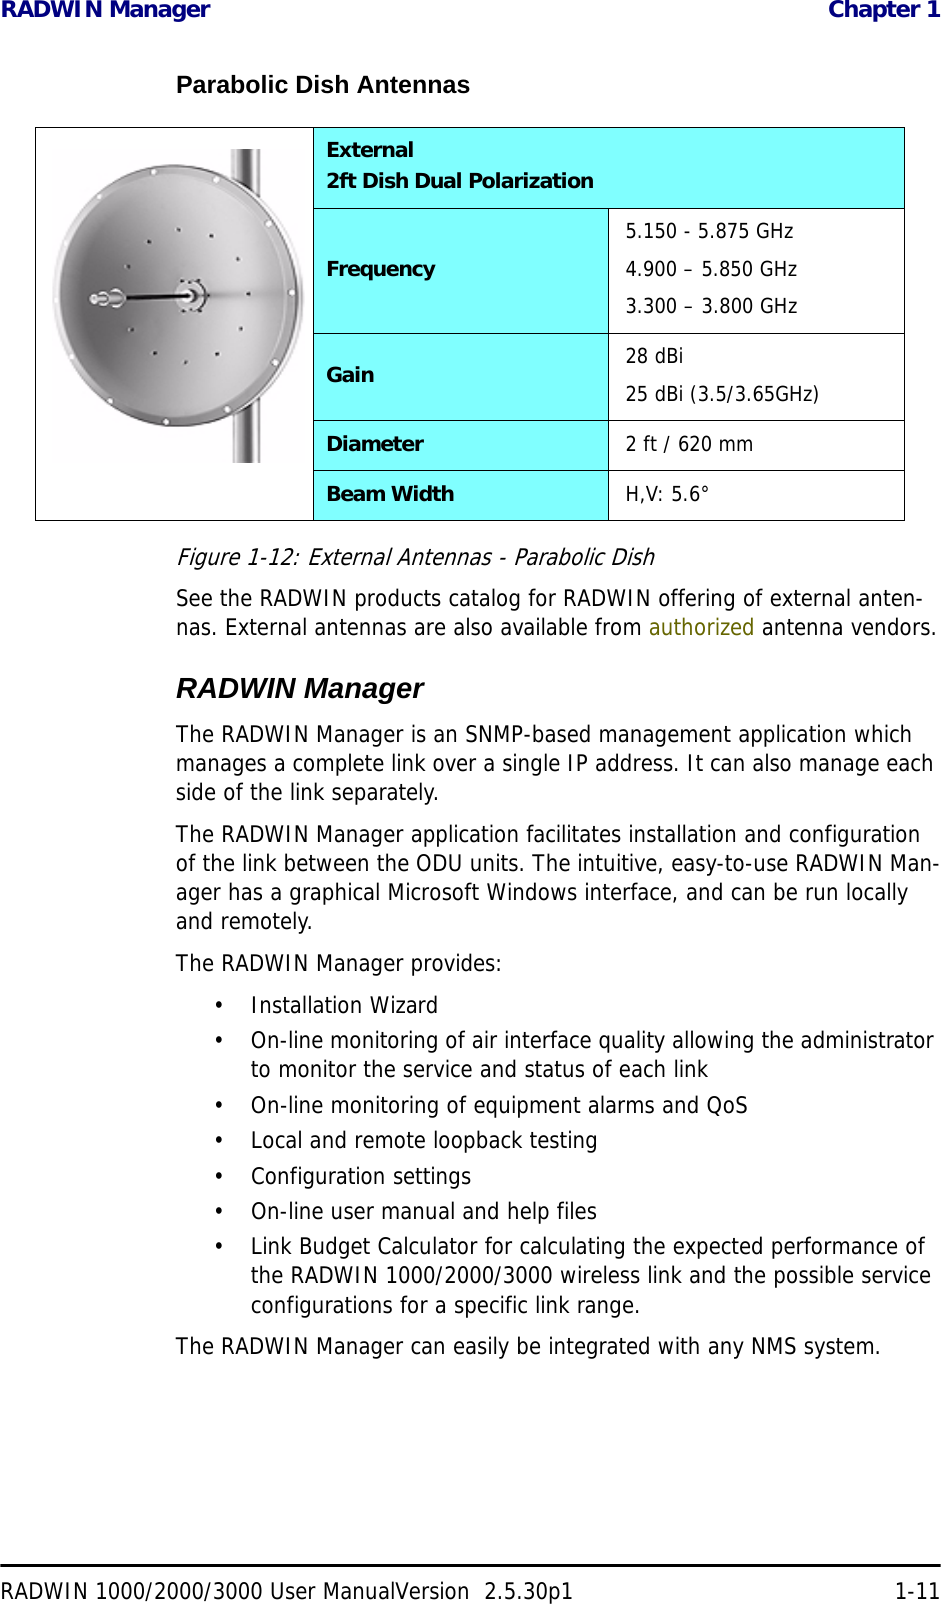 RADWIN Manager  Chapter 1RADWIN 1000/2000/3000 User ManualVersion  2.5.30p1 1-11Parabolic Dish AntennasFigure 1-12: External Antennas - Parabolic DishSee the RADWIN products catalog for RADWIN offering of external anten-nas. External antennas are also available from authorized antenna vendors.RADWIN ManagerThe RADWIN Manager is an SNMP-based management application which manages a complete link over a single IP address. It can also manage each side of the link separately.The RADWIN Manager application facilitates installation and configuration of the link between the ODU units. The intuitive, easy-to-use RADWIN Man-ager has a graphical Microsoft Windows interface, and can be run locally and remotely. The RADWIN Manager provides:• Installation Wizard• On-line monitoring of air interface quality allowing the administrator to monitor the service and status of each link• On-line monitoring of equipment alarms and QoS• Local and remote loopback testing• Configuration settings• On-line user manual and help files• Link Budget Calculator for calculating the expected performance of the RADWIN 1000/2000/3000 wireless link and the possible service configurations for a specific link range.The RADWIN Manager can easily be integrated with any NMS system.External2ft Dish Dual PolarizationFrequency5.150 - 5.875 GHz4.900 – 5.850 GHz3.300 – 3.800 GHzGain 28 dBi25 dBi (3.5/3.65GHz)Diameter 2 ft / 620 mmBeam Width H,V: 5.6°